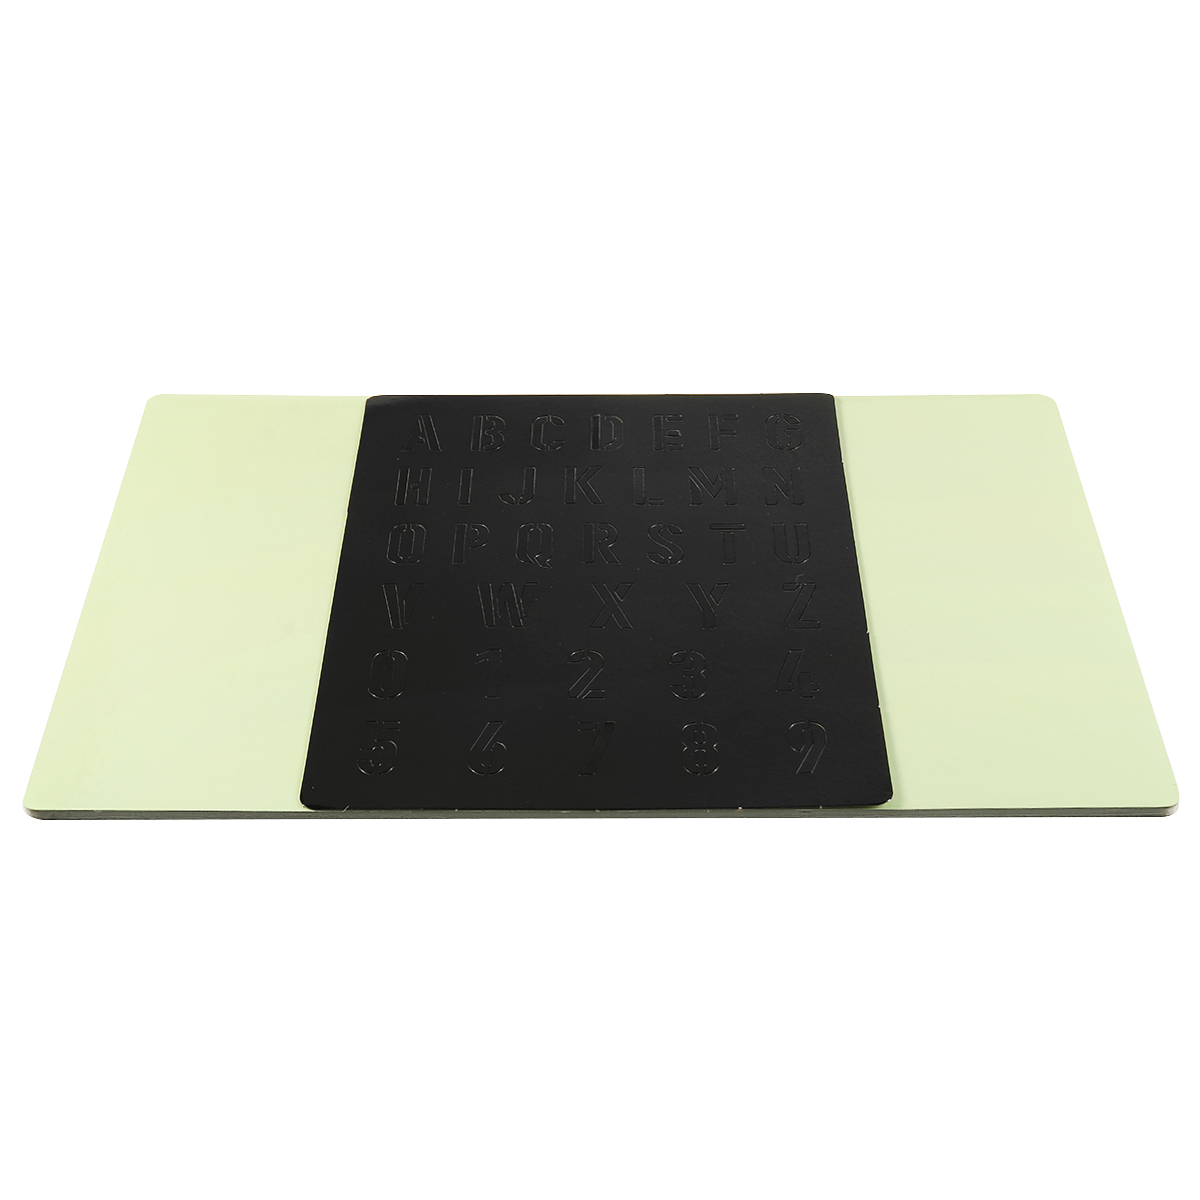 A3 / A4 / A5 Repainted Luminous Hand-Writing Drawing Board with Copy Cardboard